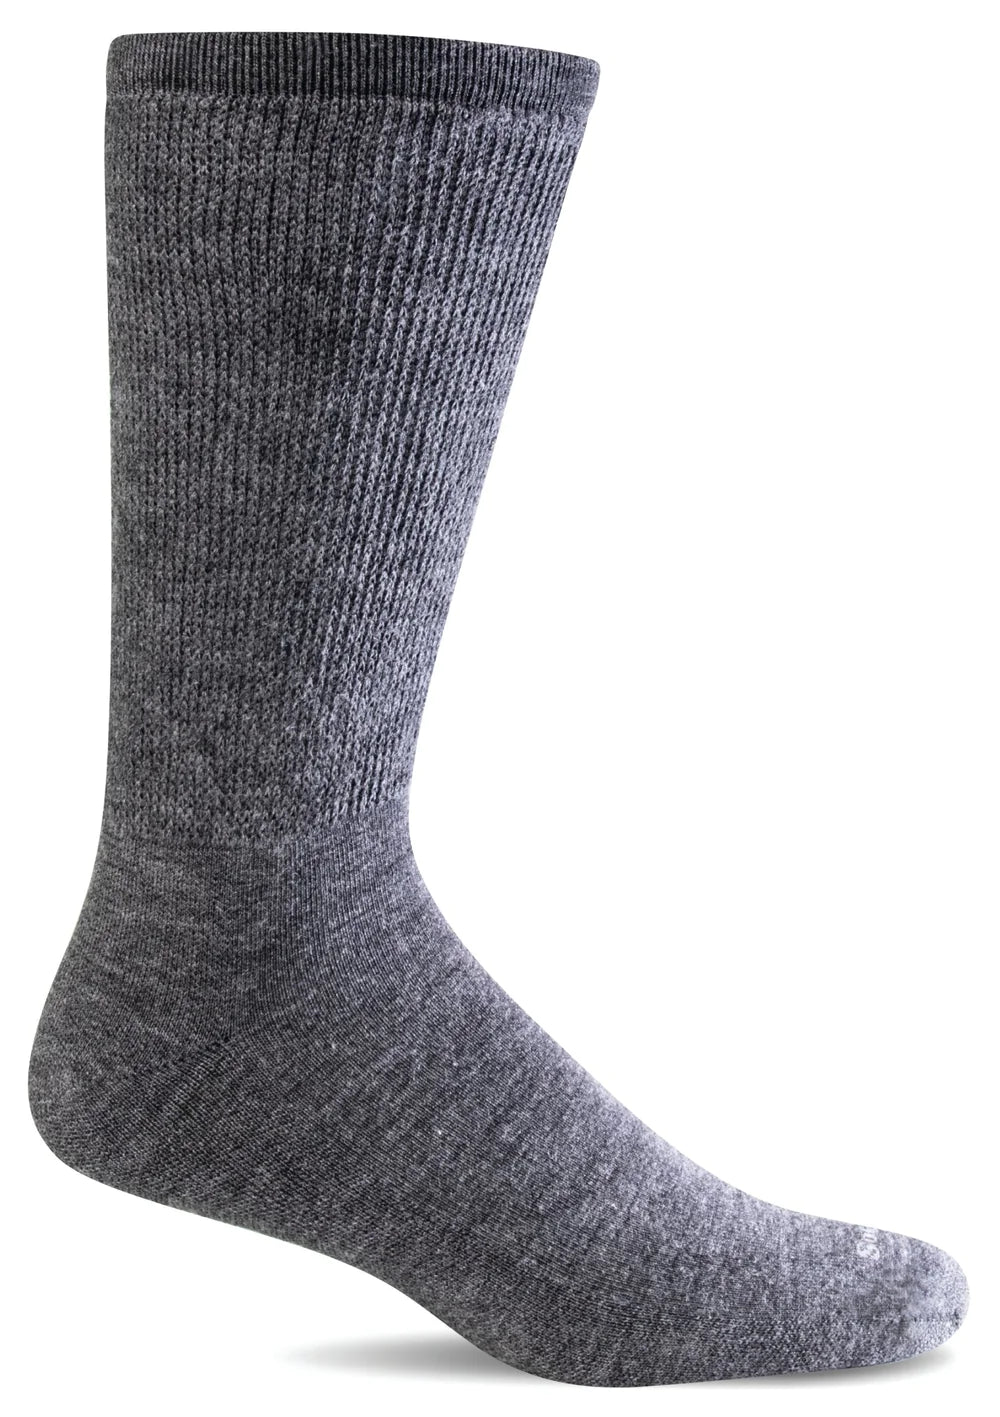 Sockwell - Men's Extra Easy Relaxed Fit Socks Light Cushion - Charcoal